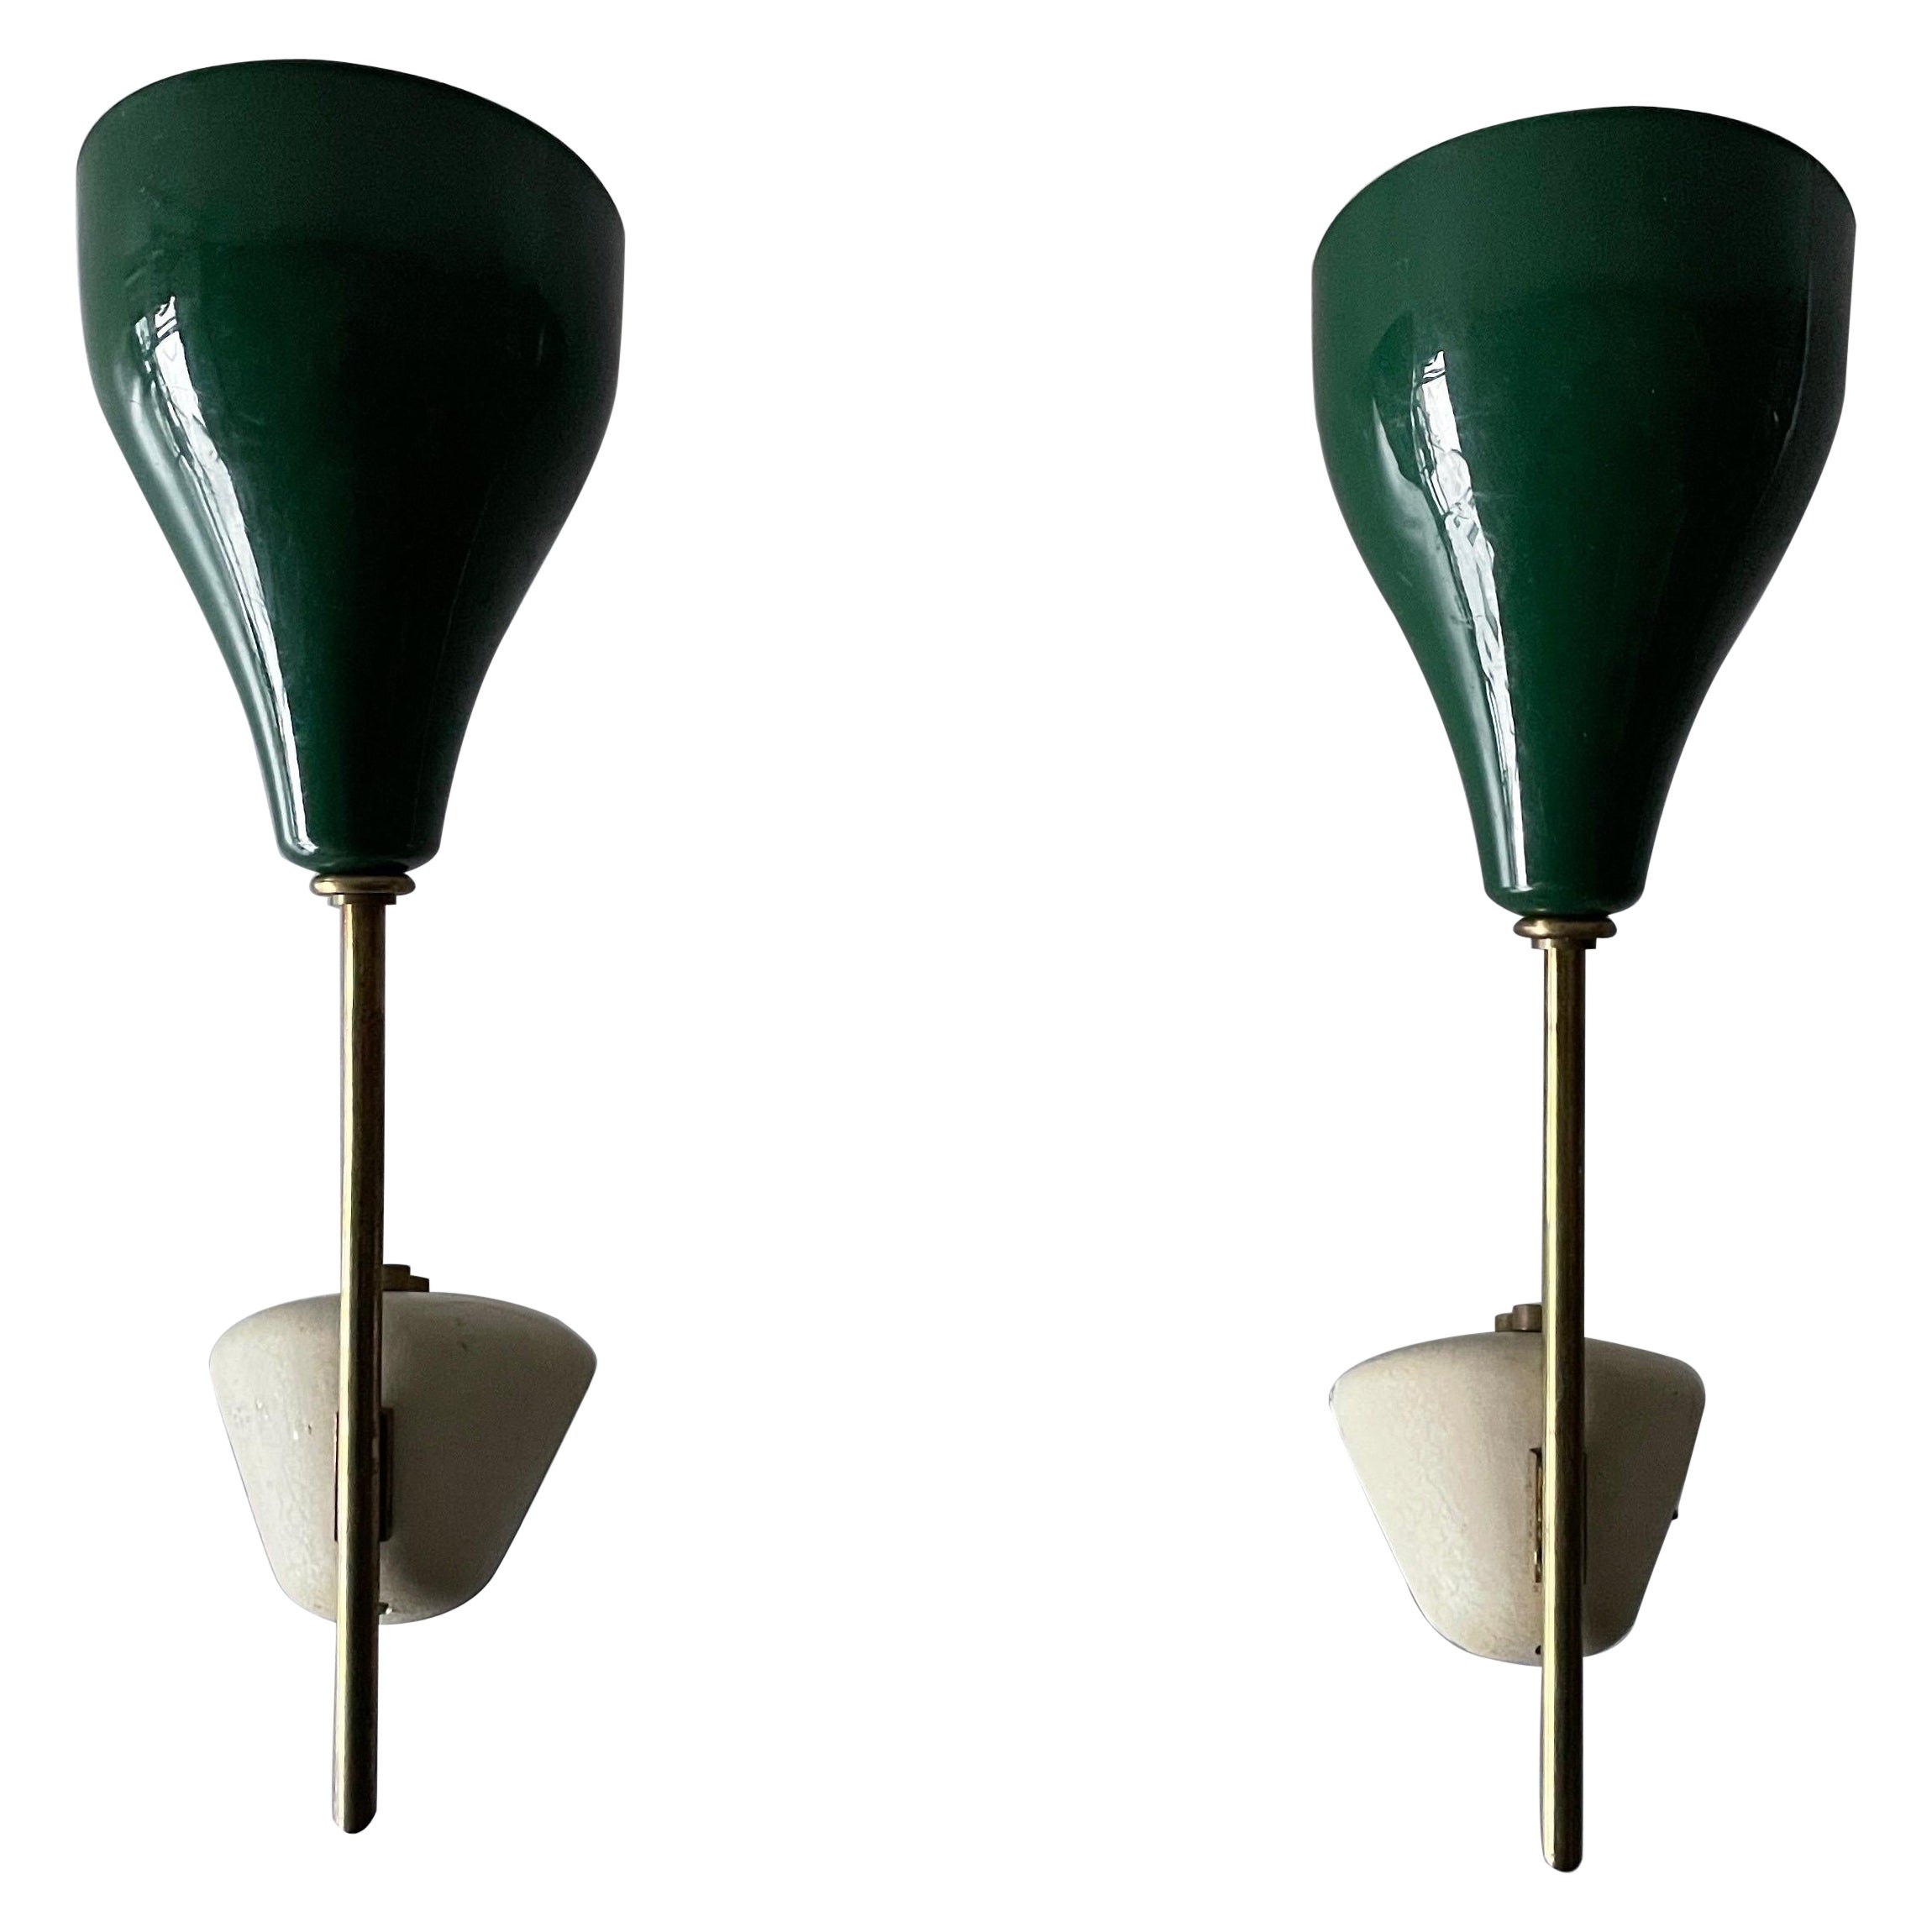 Midcentury Green Shade Pair of Sconces, 1950s, Italy